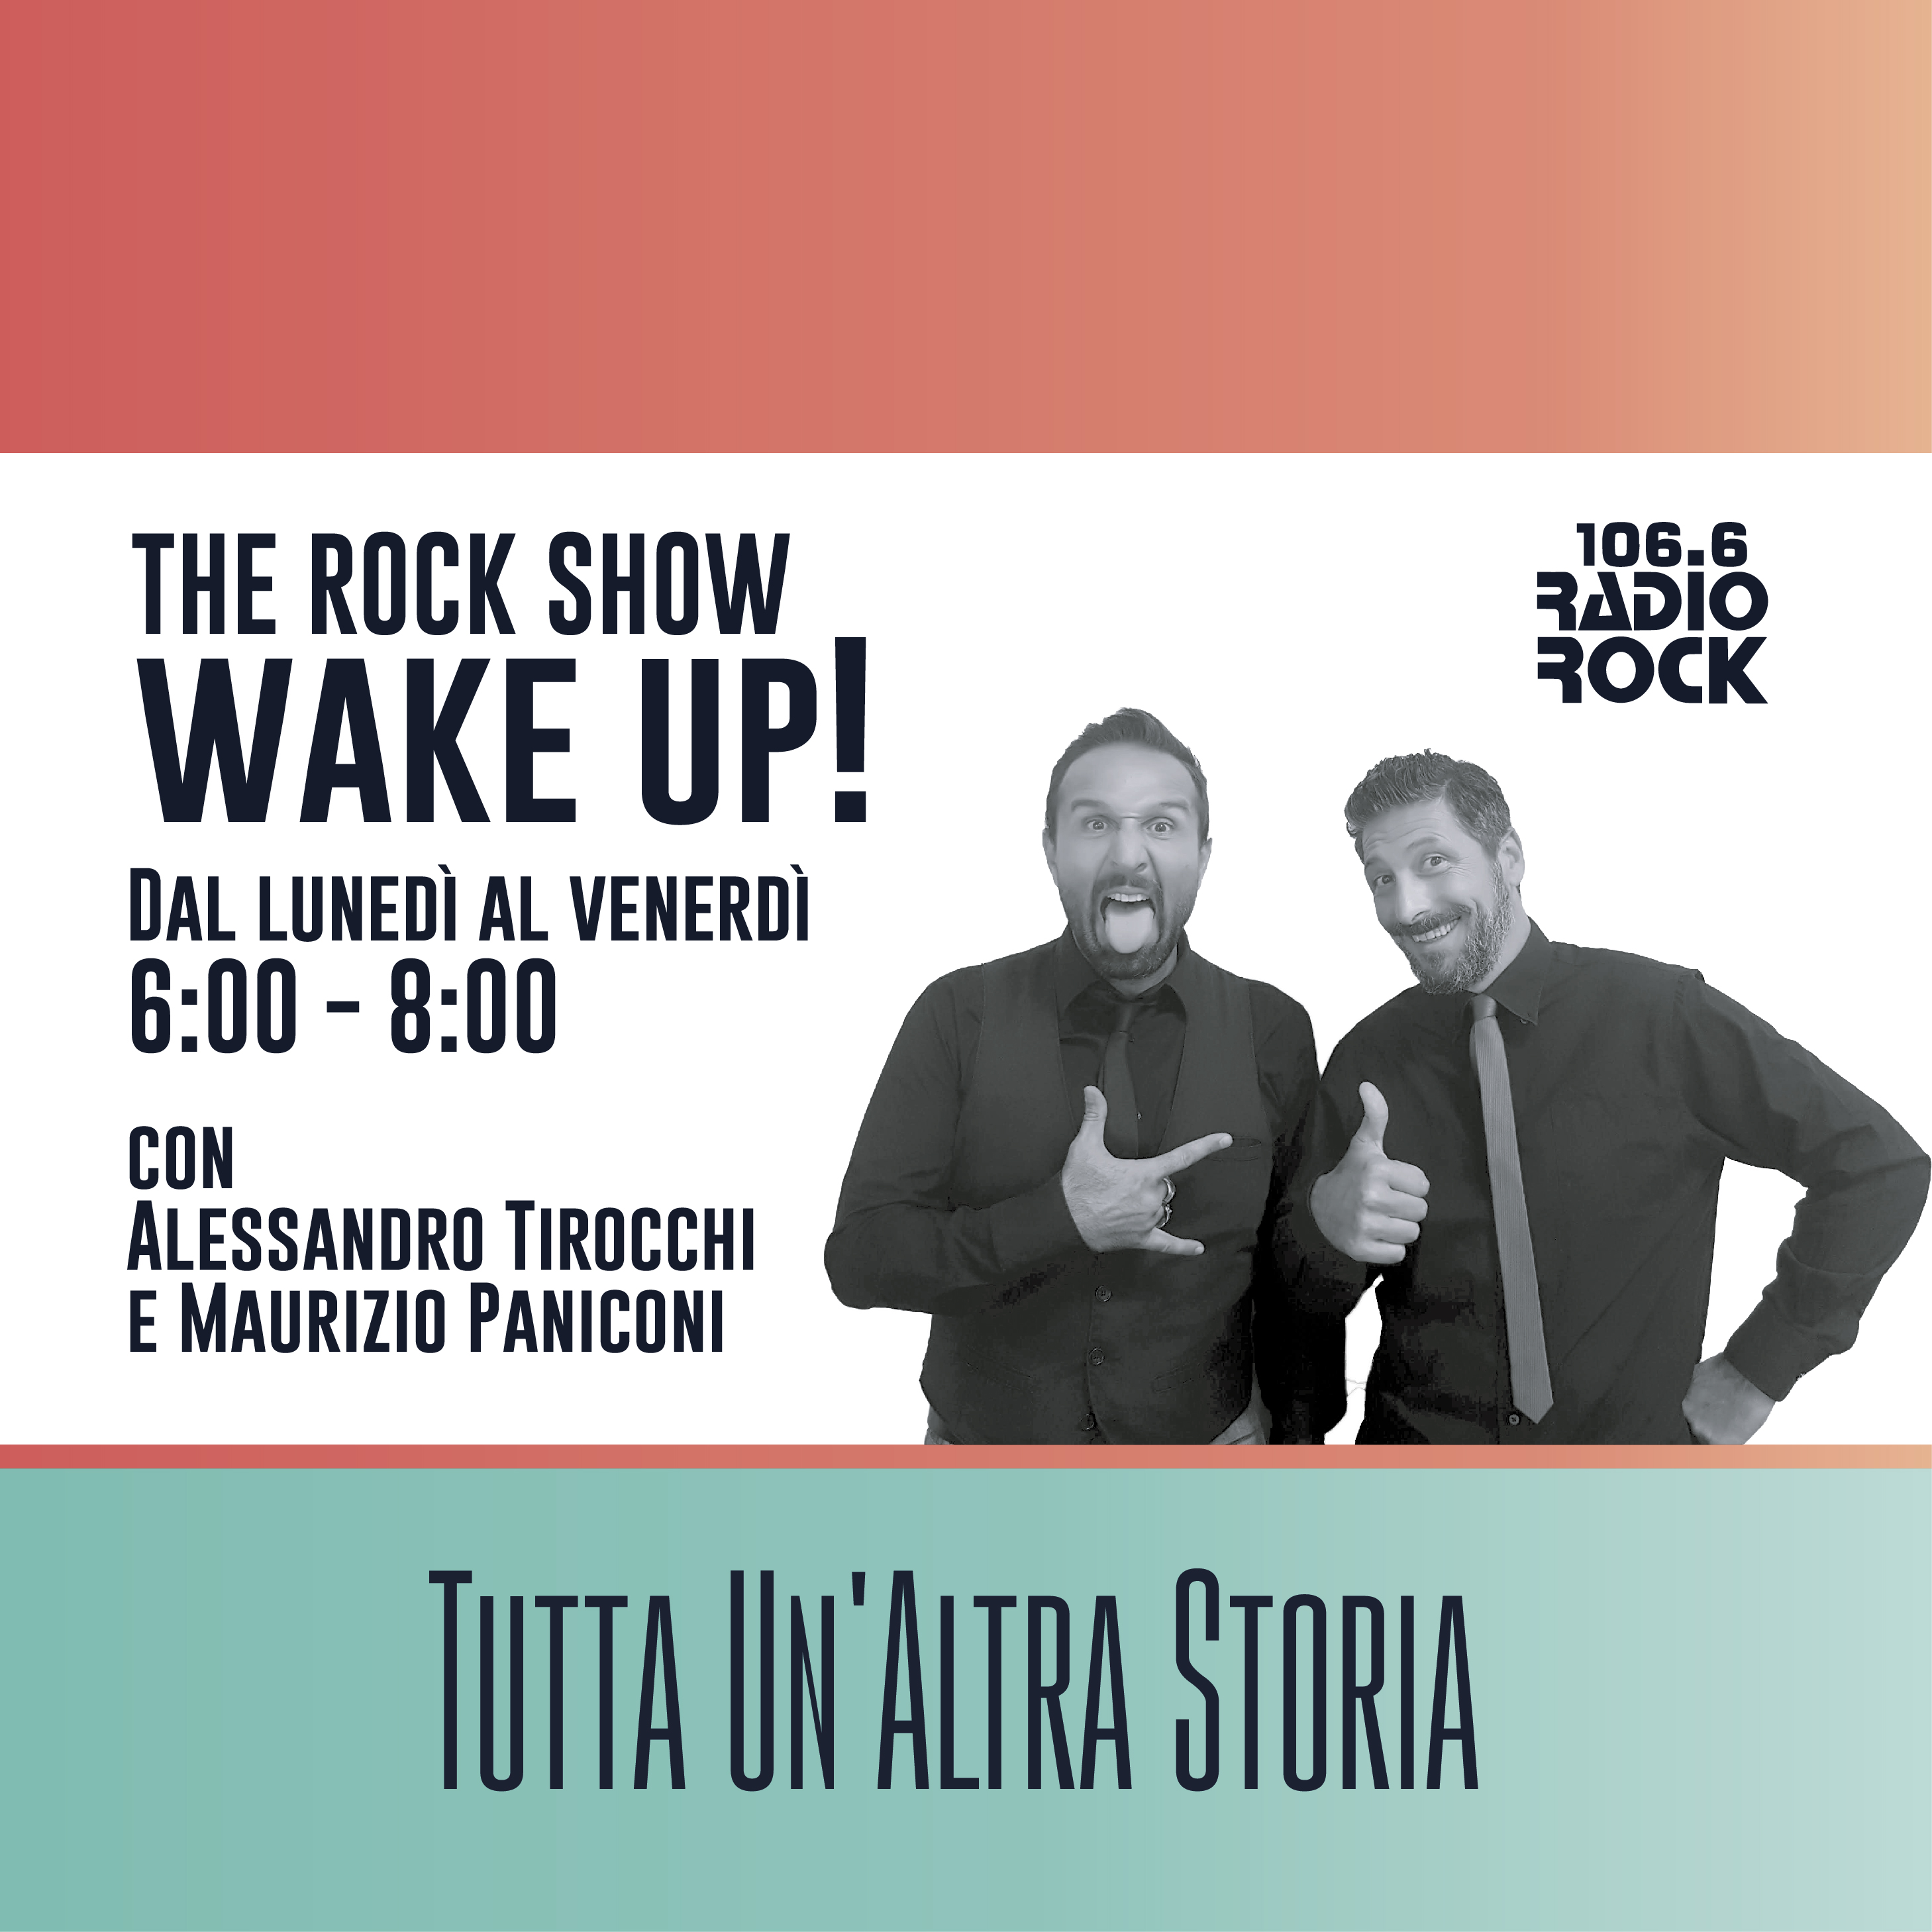 The Rock Show: Wake Up! (20-04-21)